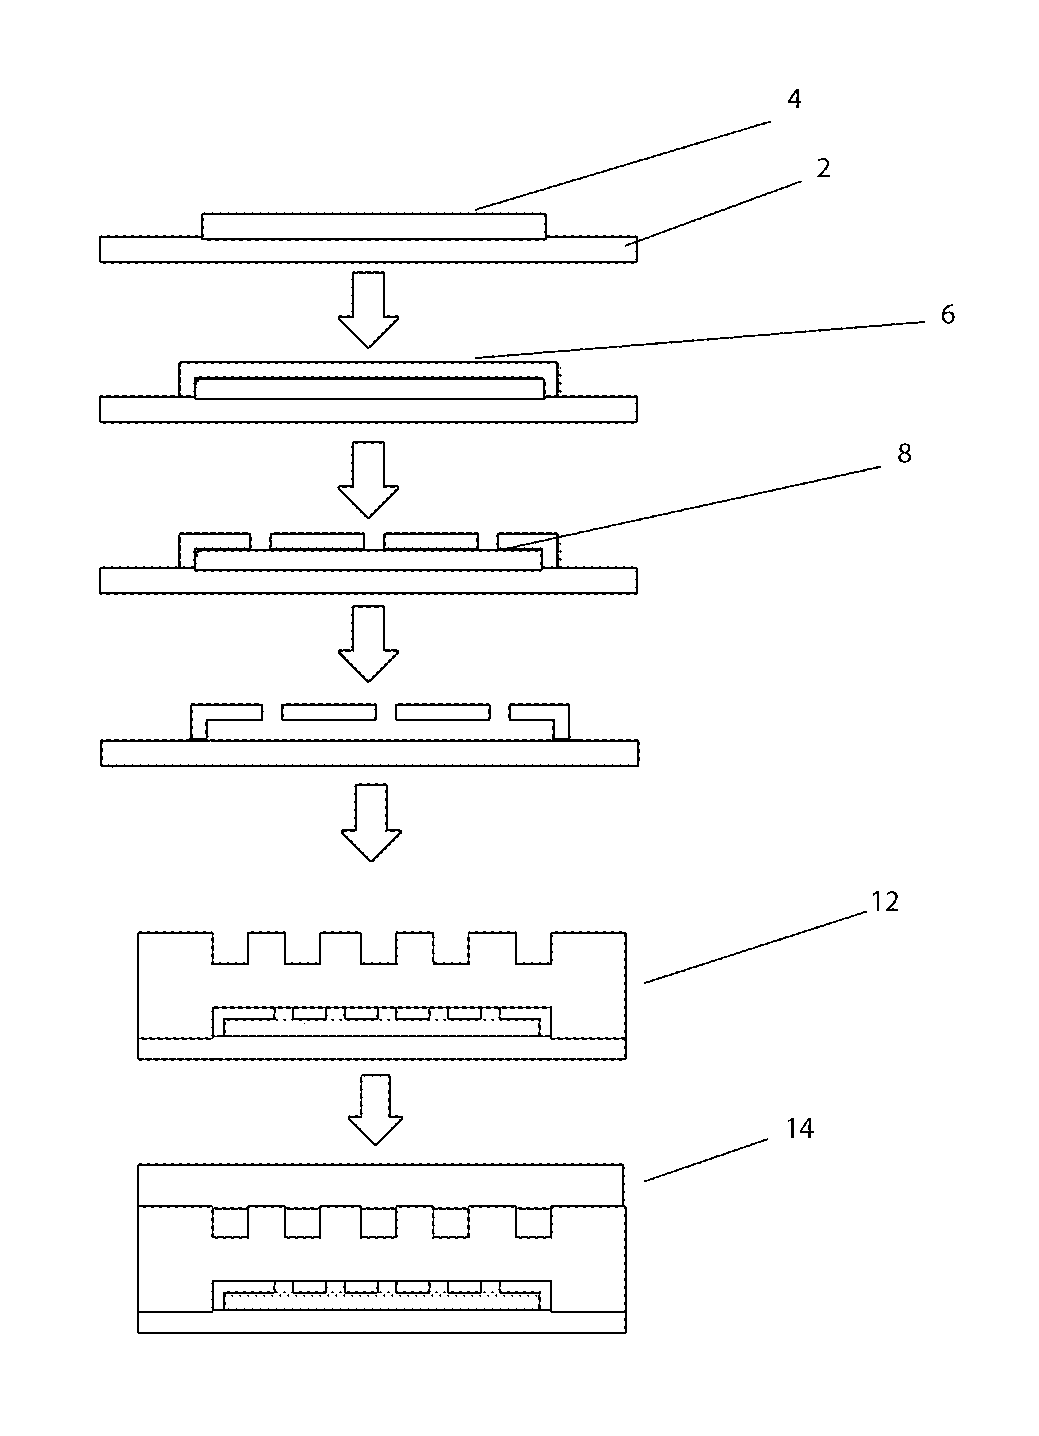 High-Throughput Platform Comprising Microtissues Perfused With Living Microvessels